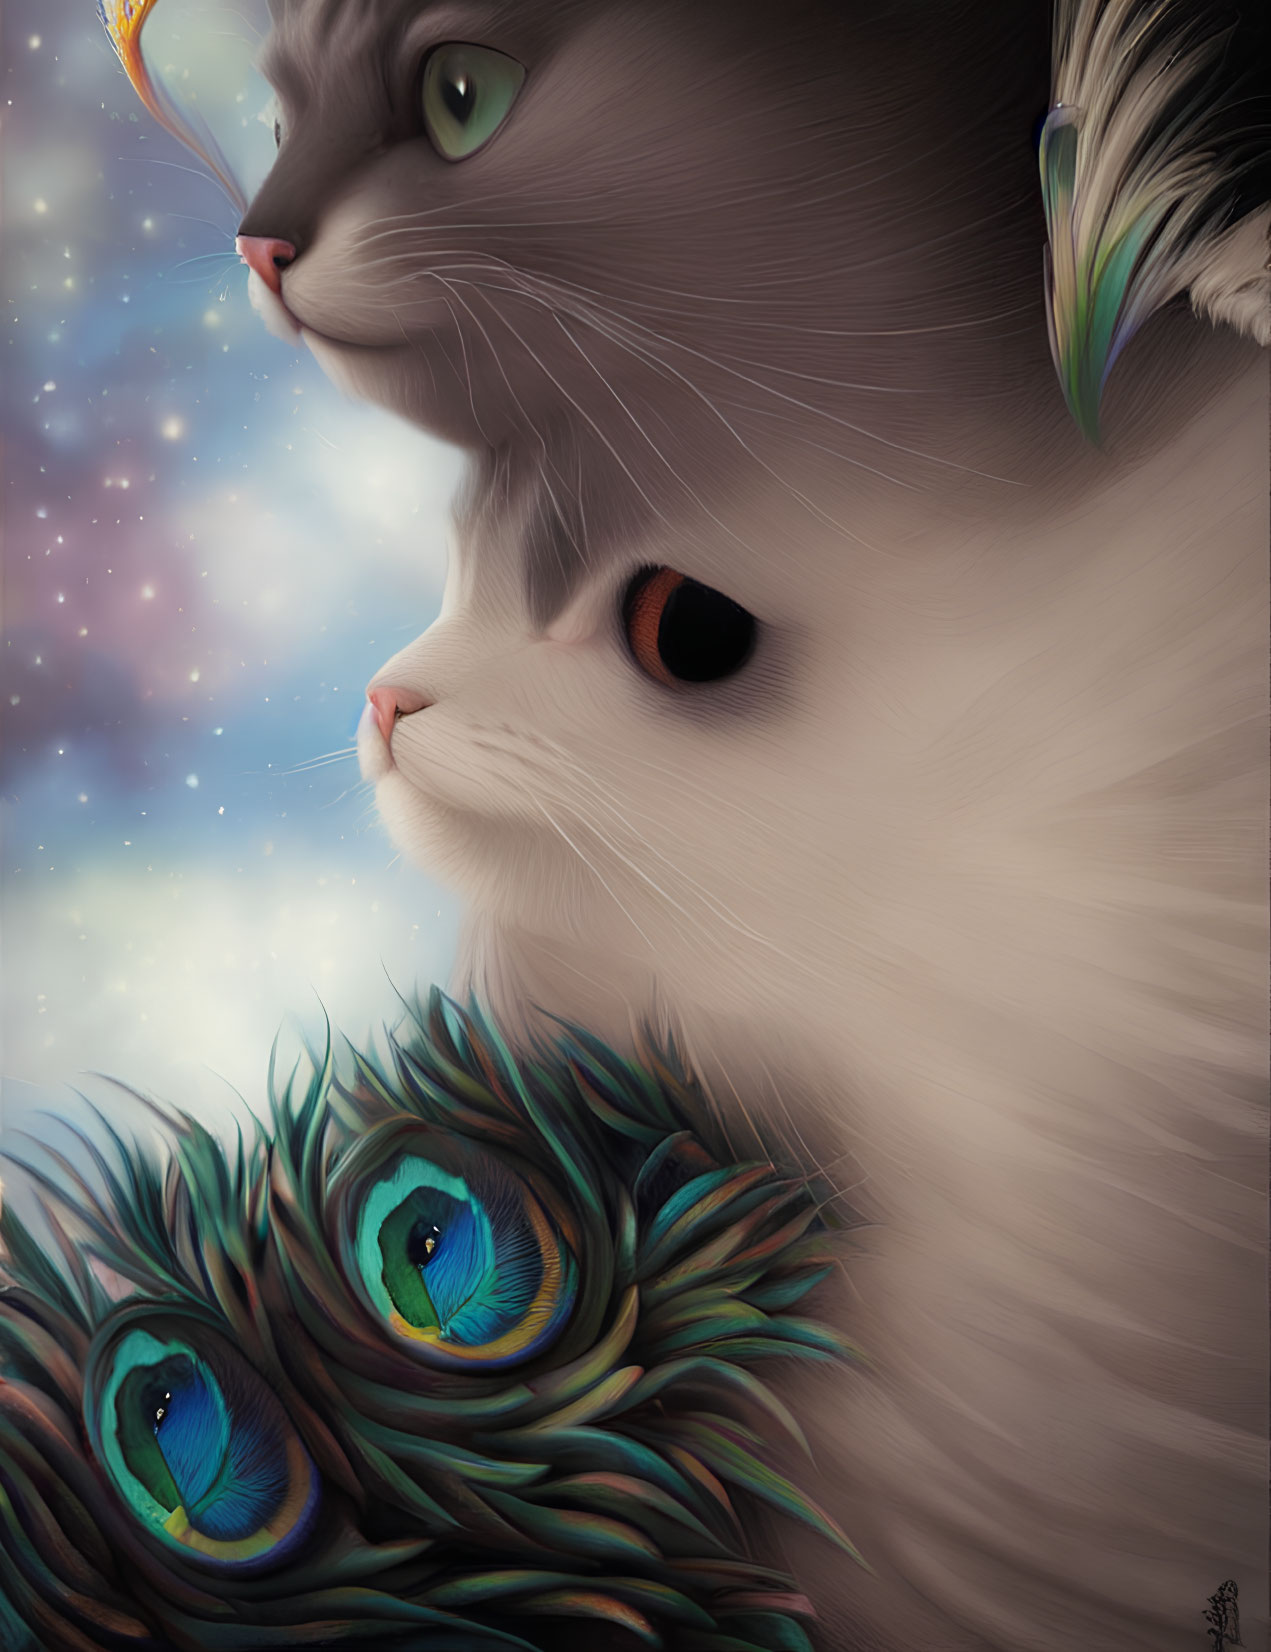 Gray and White Cat with Orange Eyes and Peacock Feather in Cosmic Setting